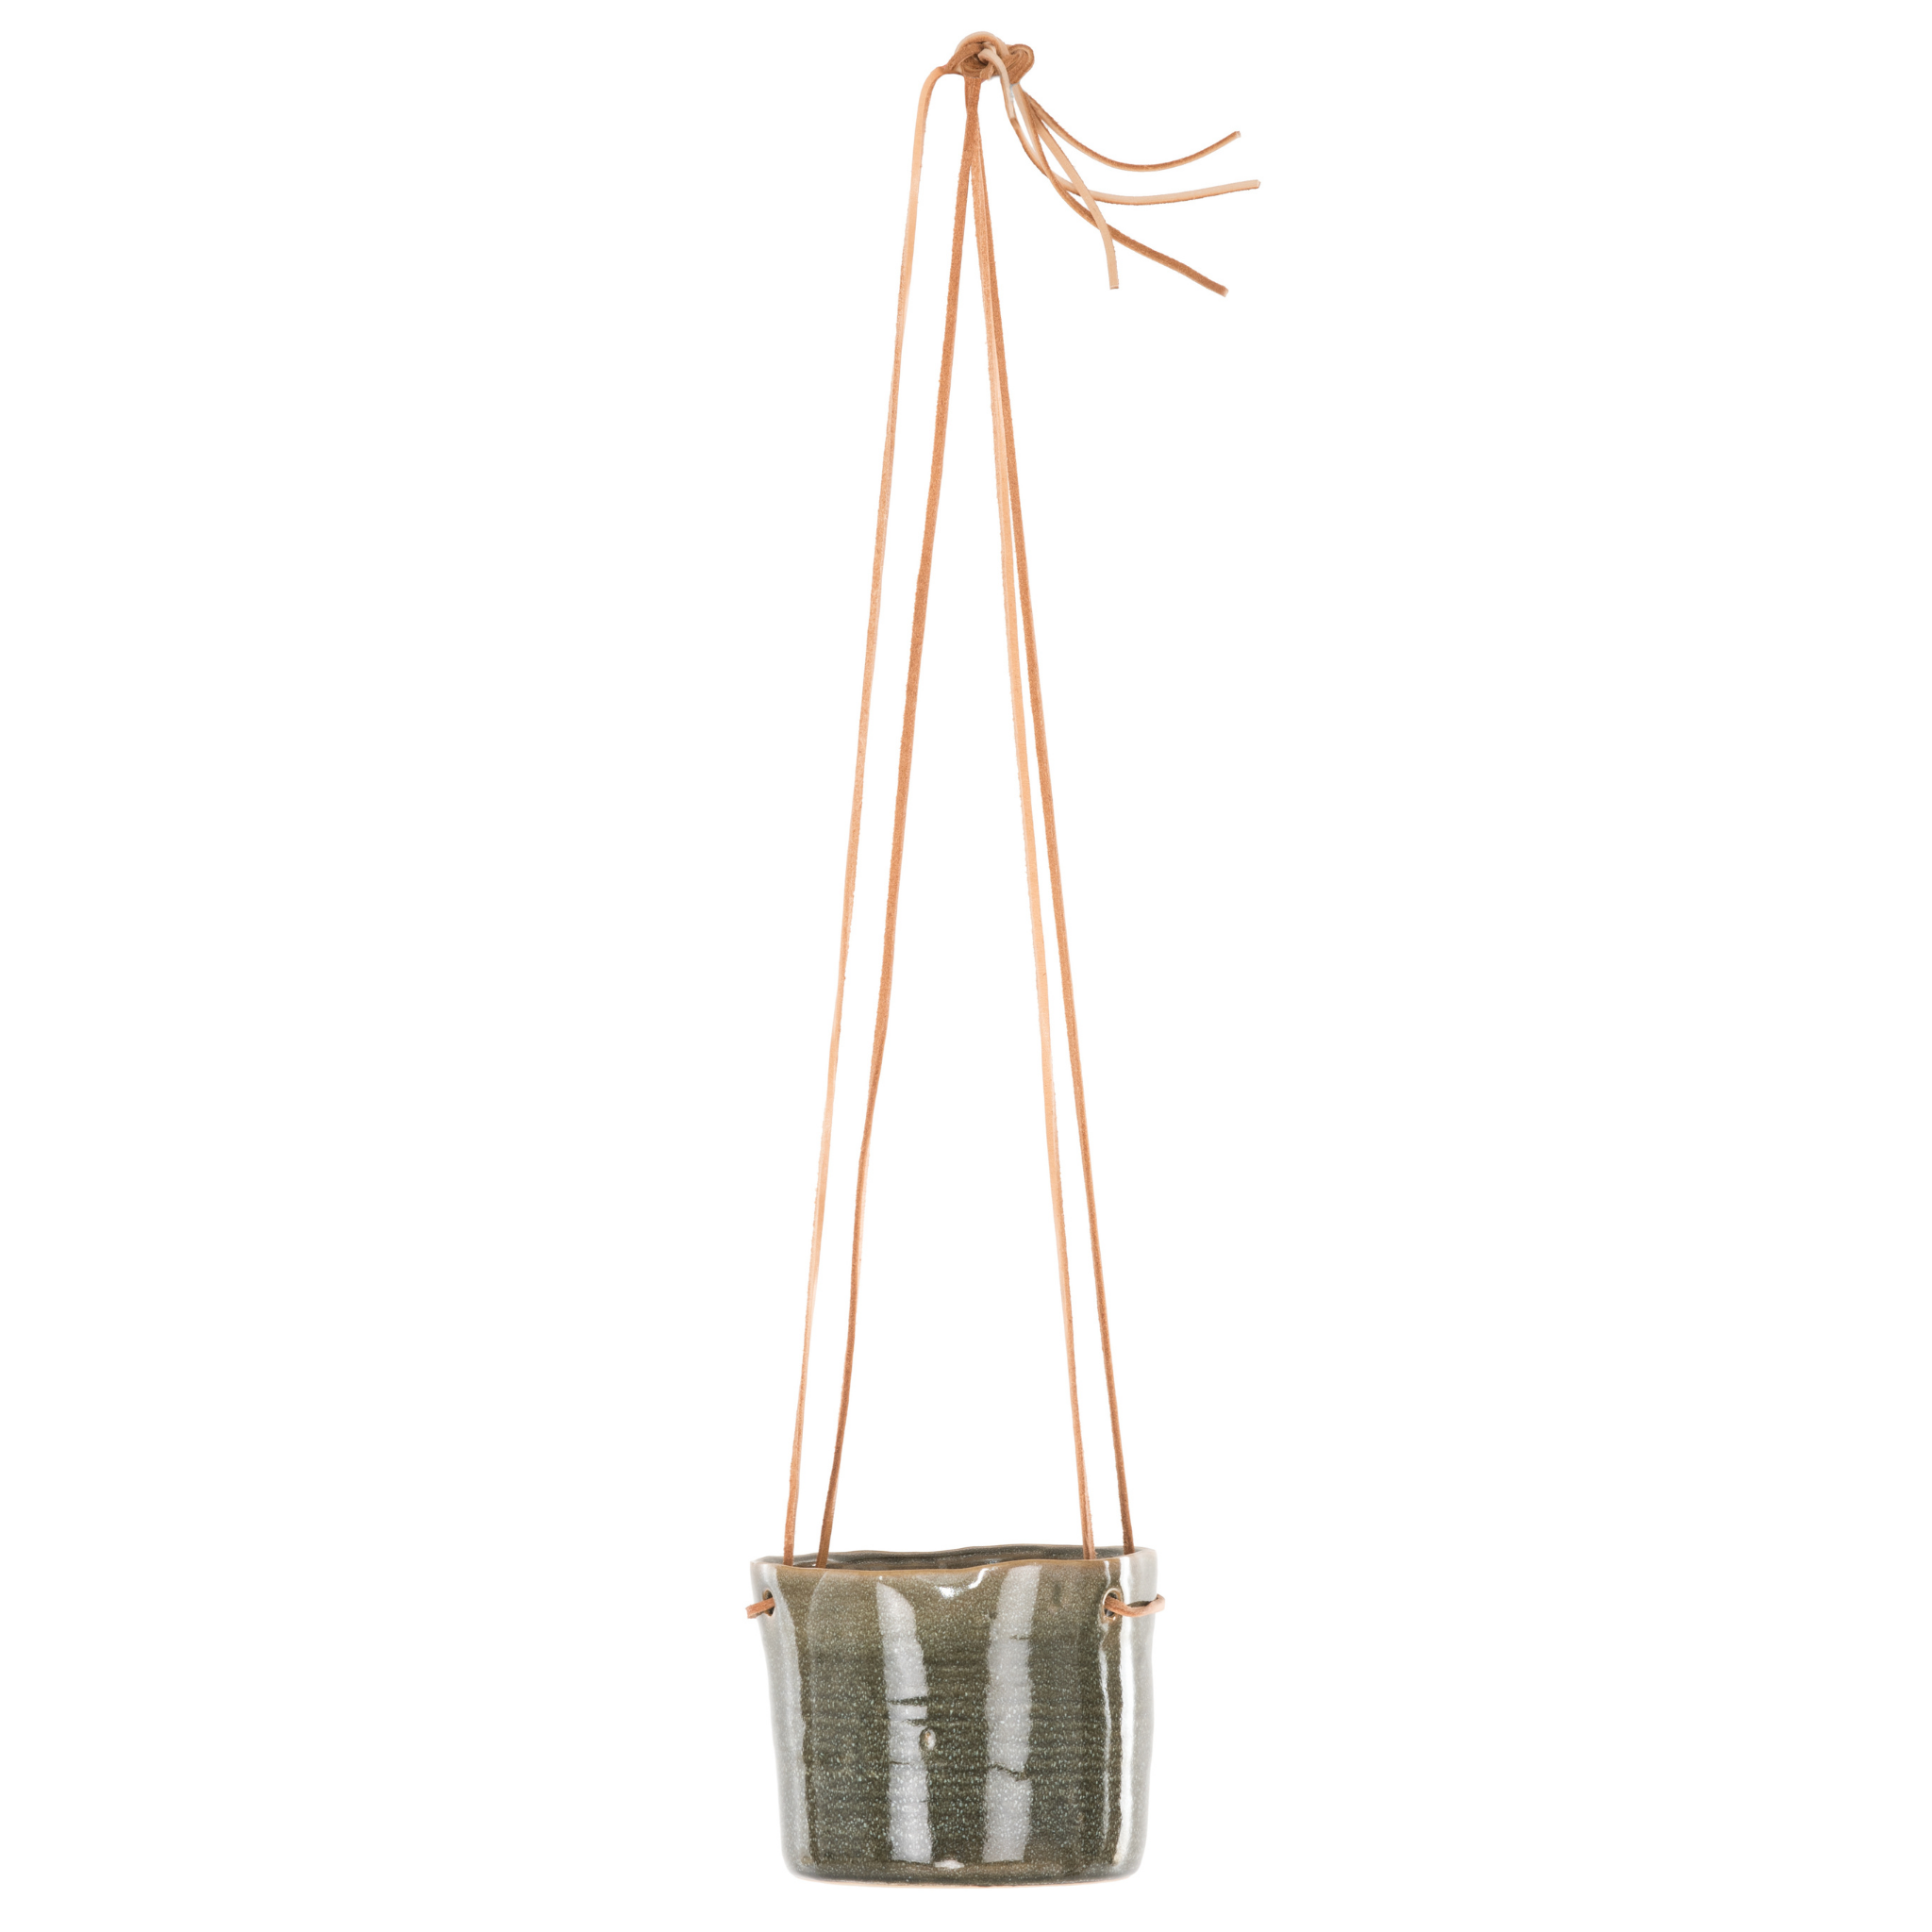 Hanging Plant Pot By all things Brighton beautiful | notonthehighstreet.com